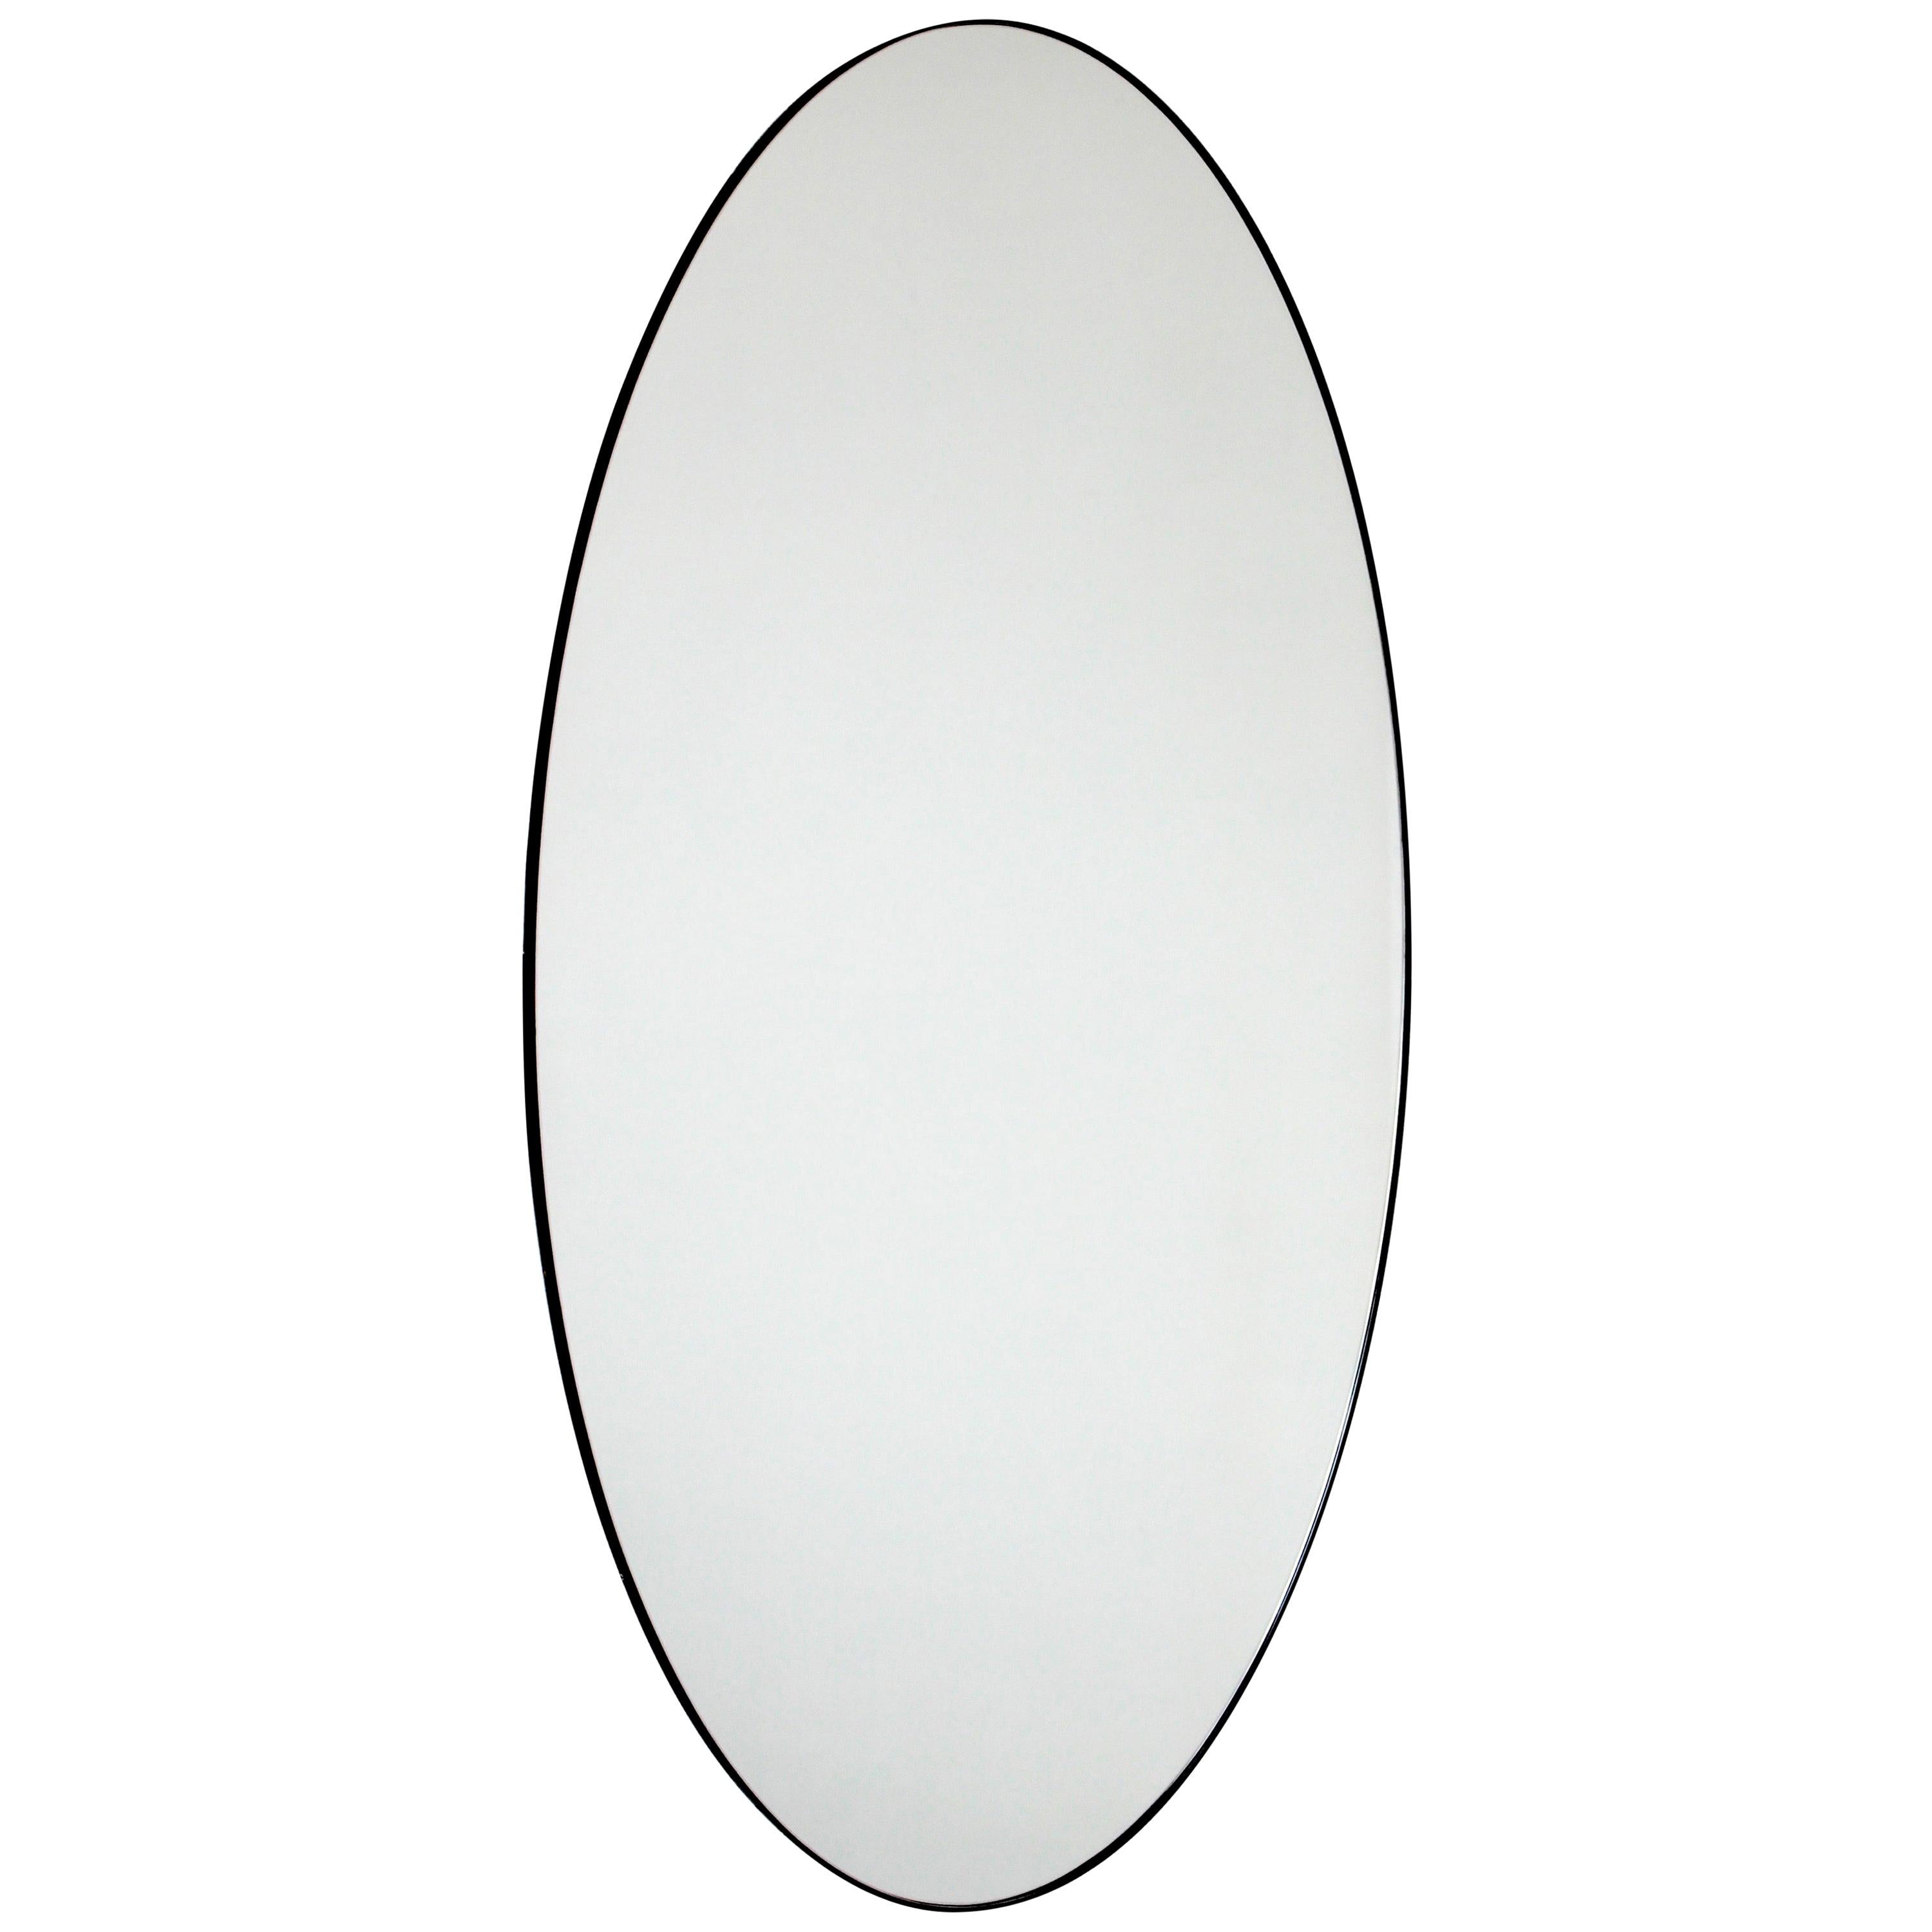 Ovalis Oval Modern Customisable Handcrafted Mirror with Black Frame, Medium